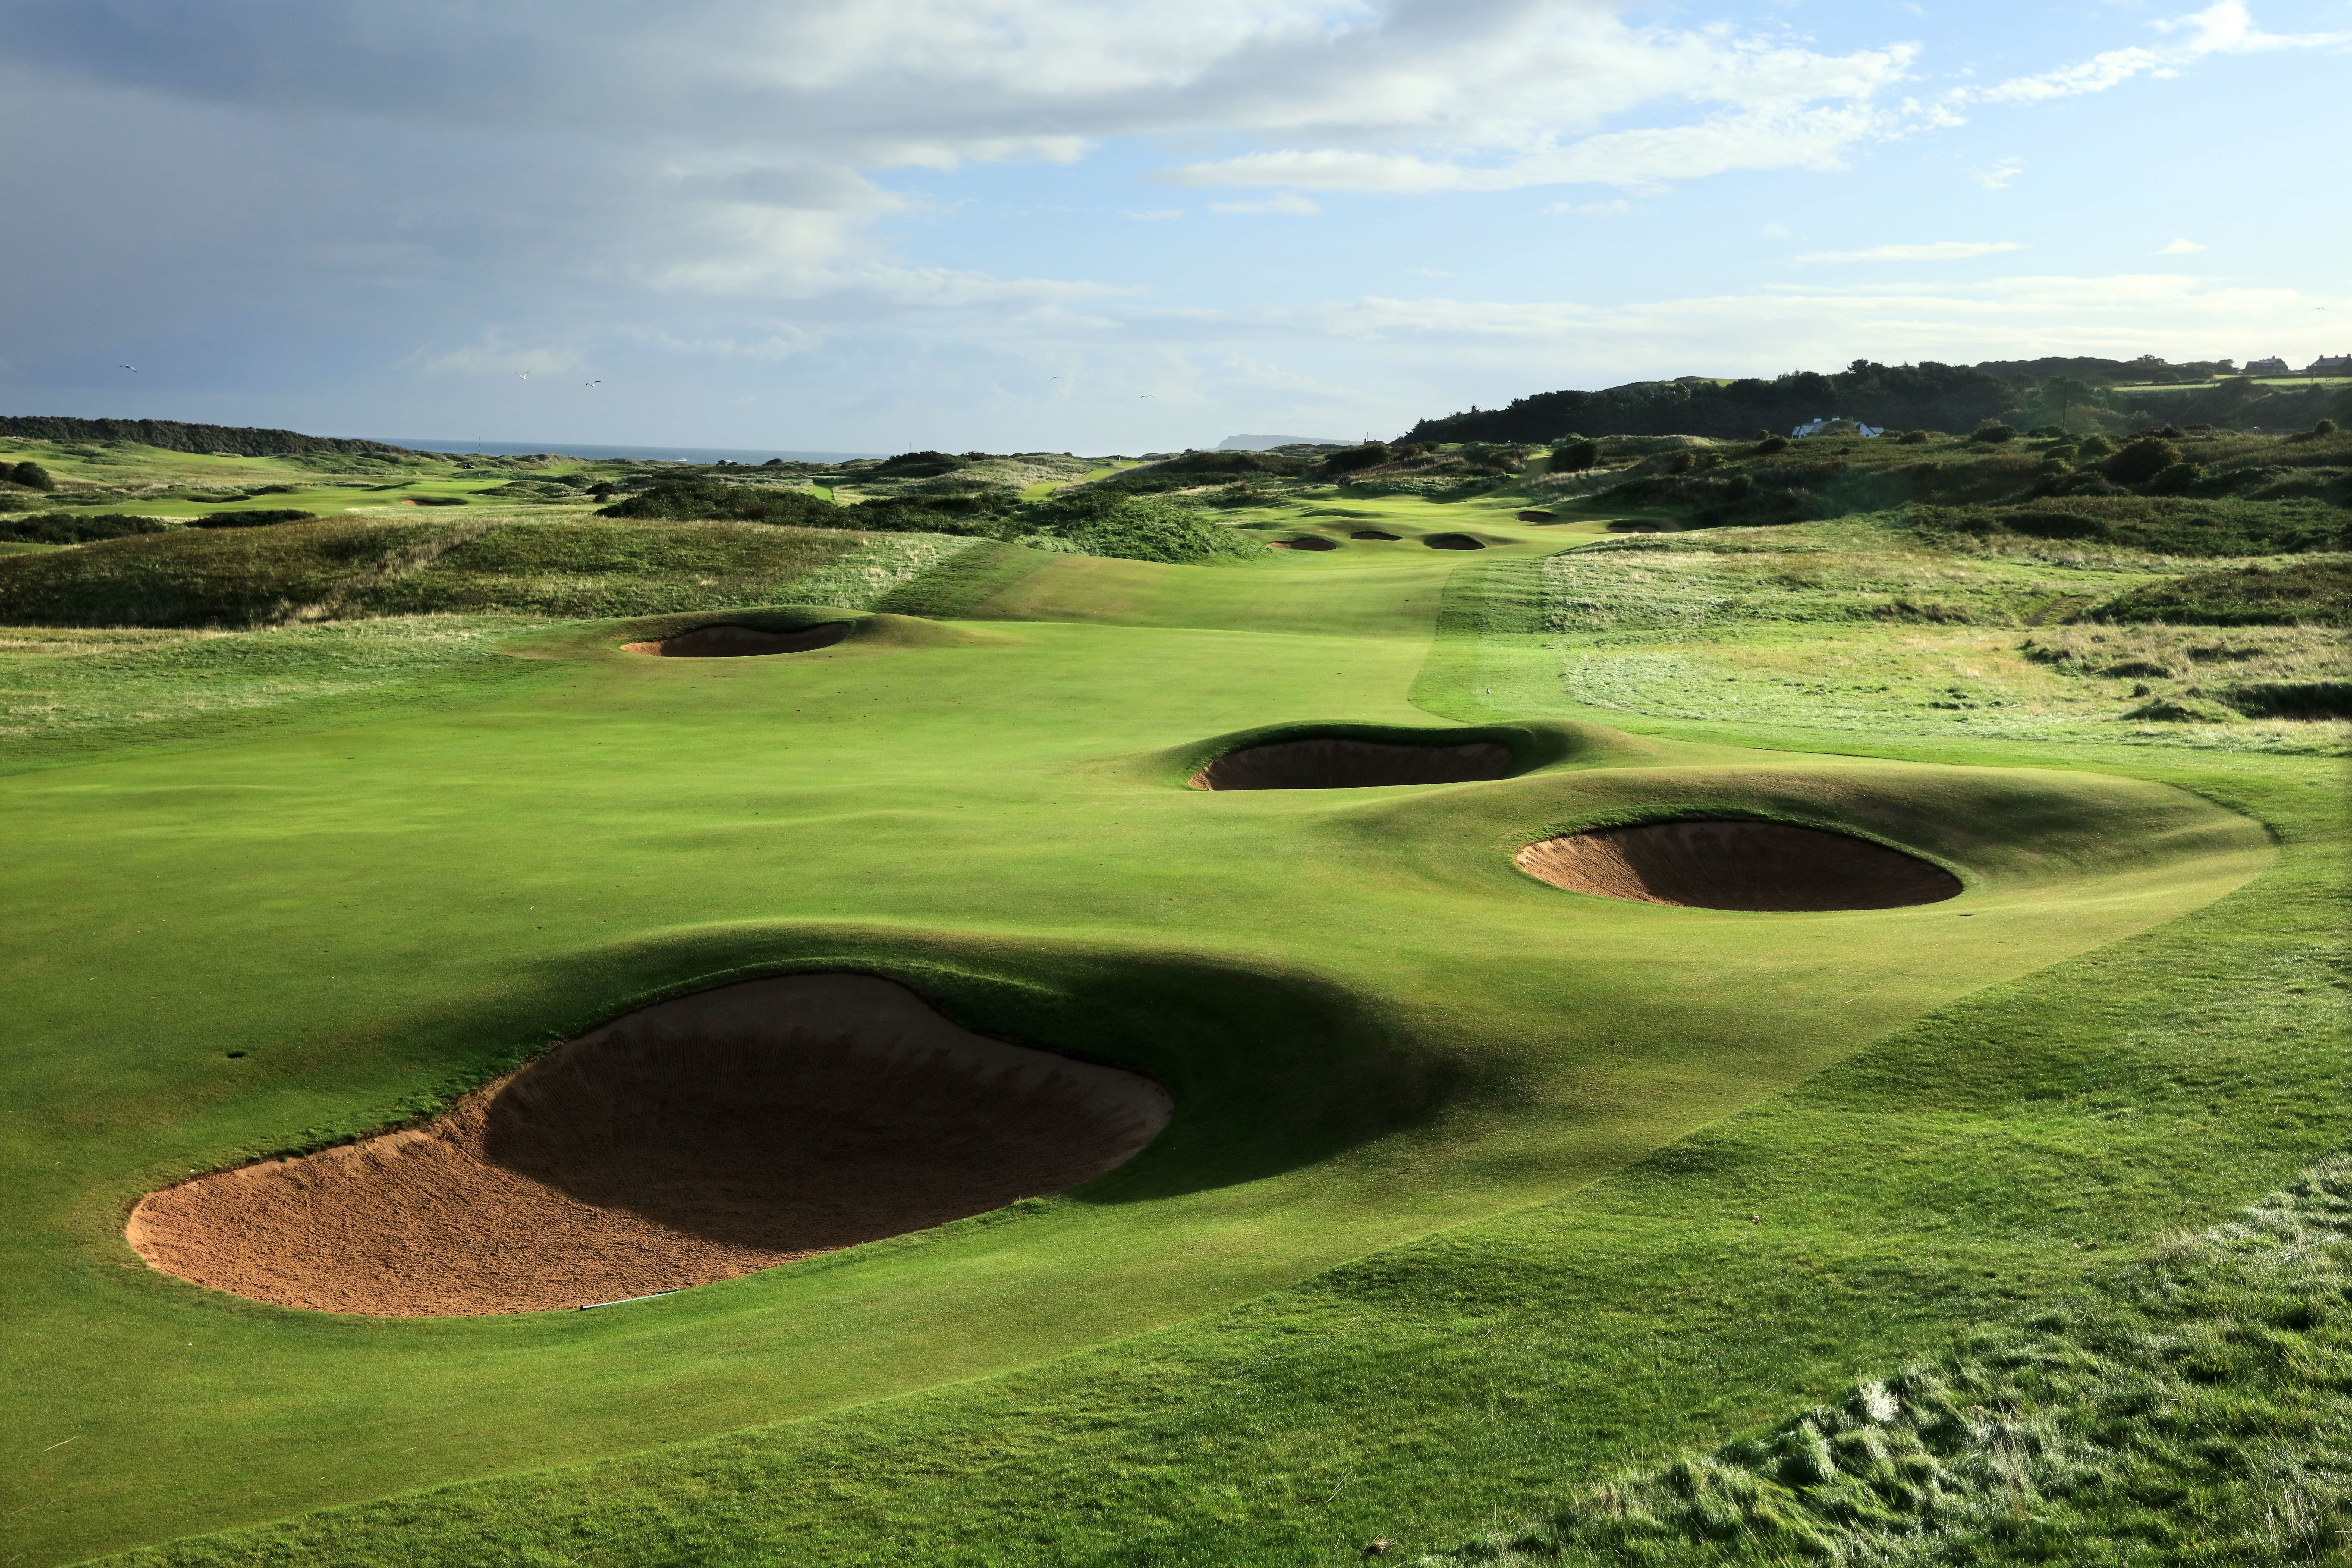 British Open 2019 Get to know the golf courses of the British Open rota